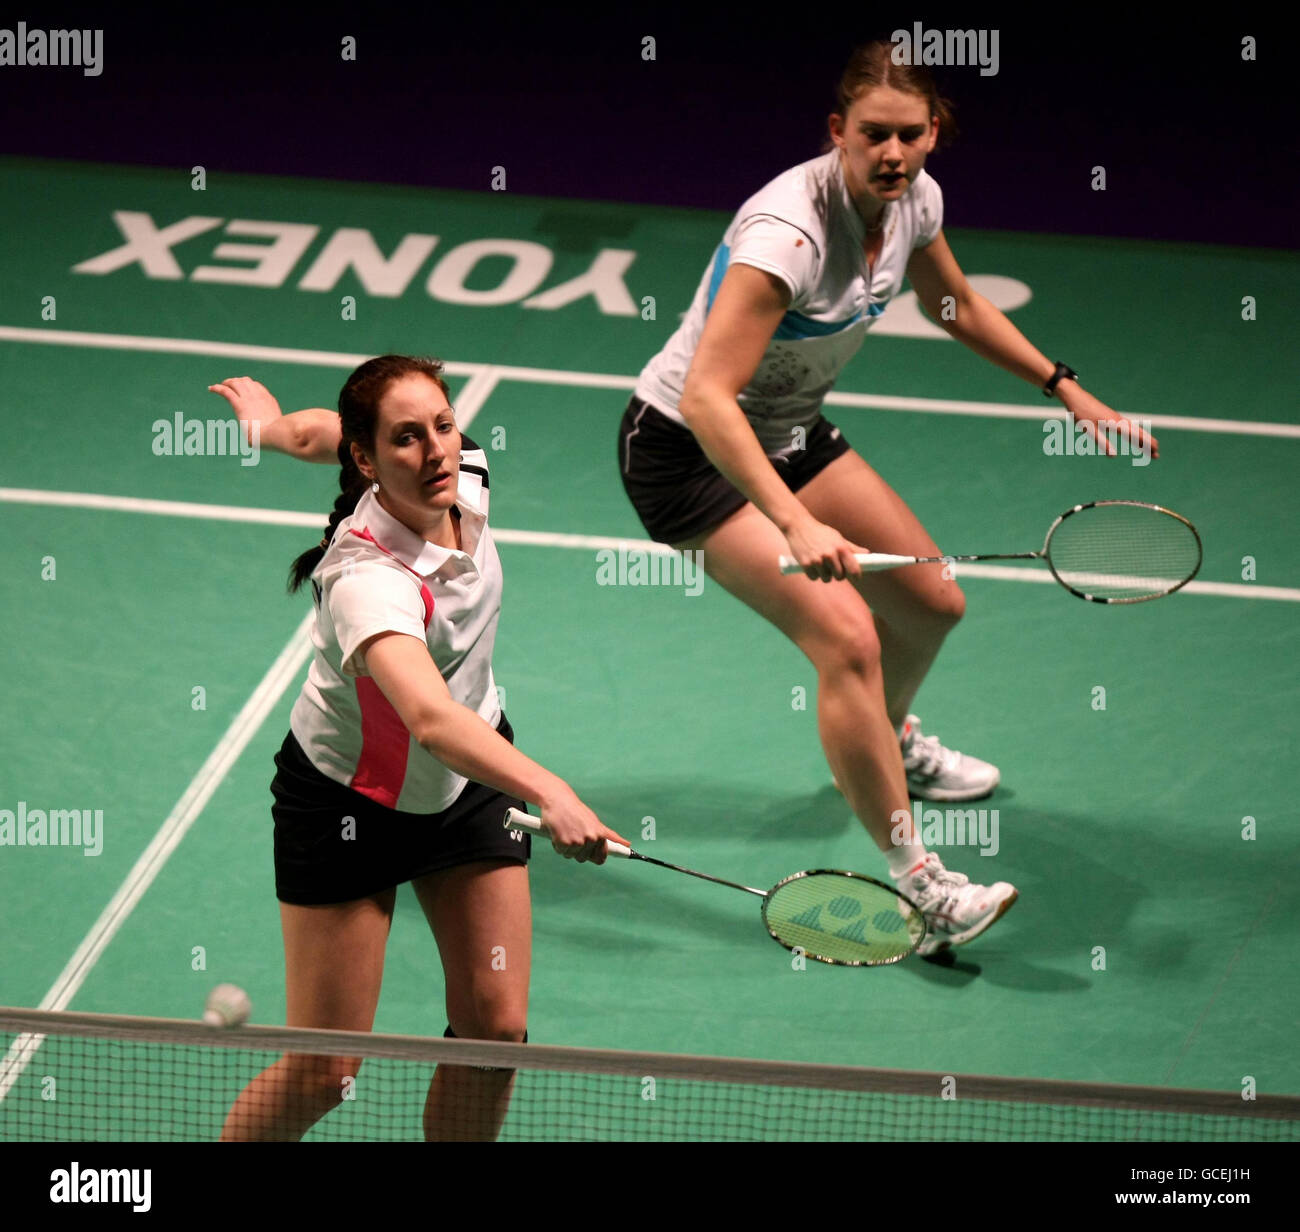 Denmark's Marie Ropke returns during her double's match with Lens Frier Kristiansen during the Yonex European Badminton Championships at the MEN Arena, Manchester. Stock Photo